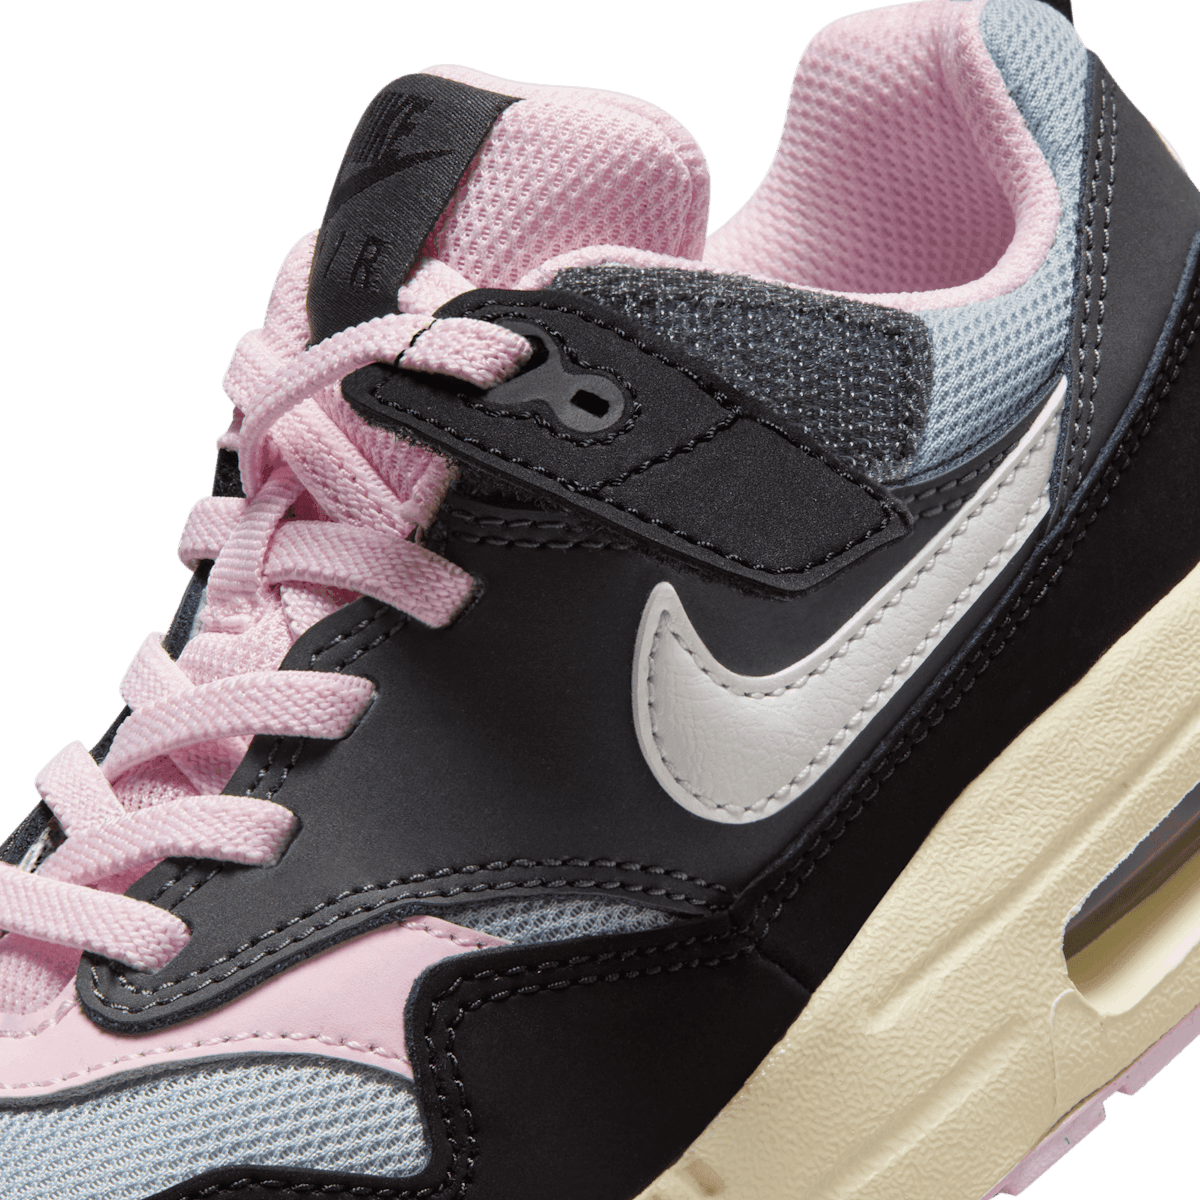 Nike Air Max 1 Black Anthracite Pink Foam (PS) Angle 6